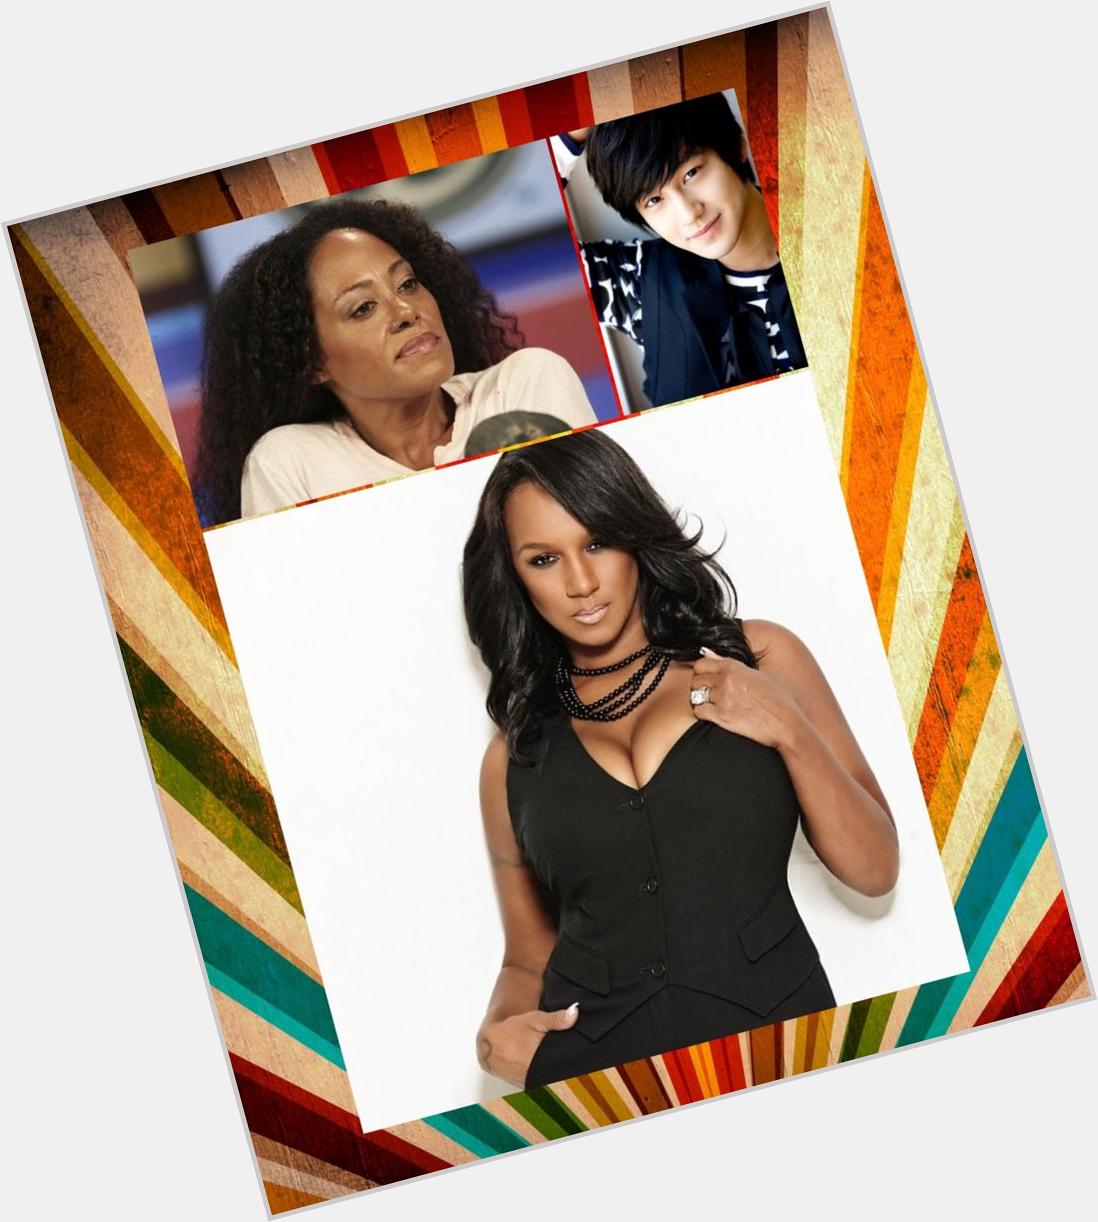  wishes Cree Summer, Jackie Christie, and Kim Bum , a very happy birthday.  